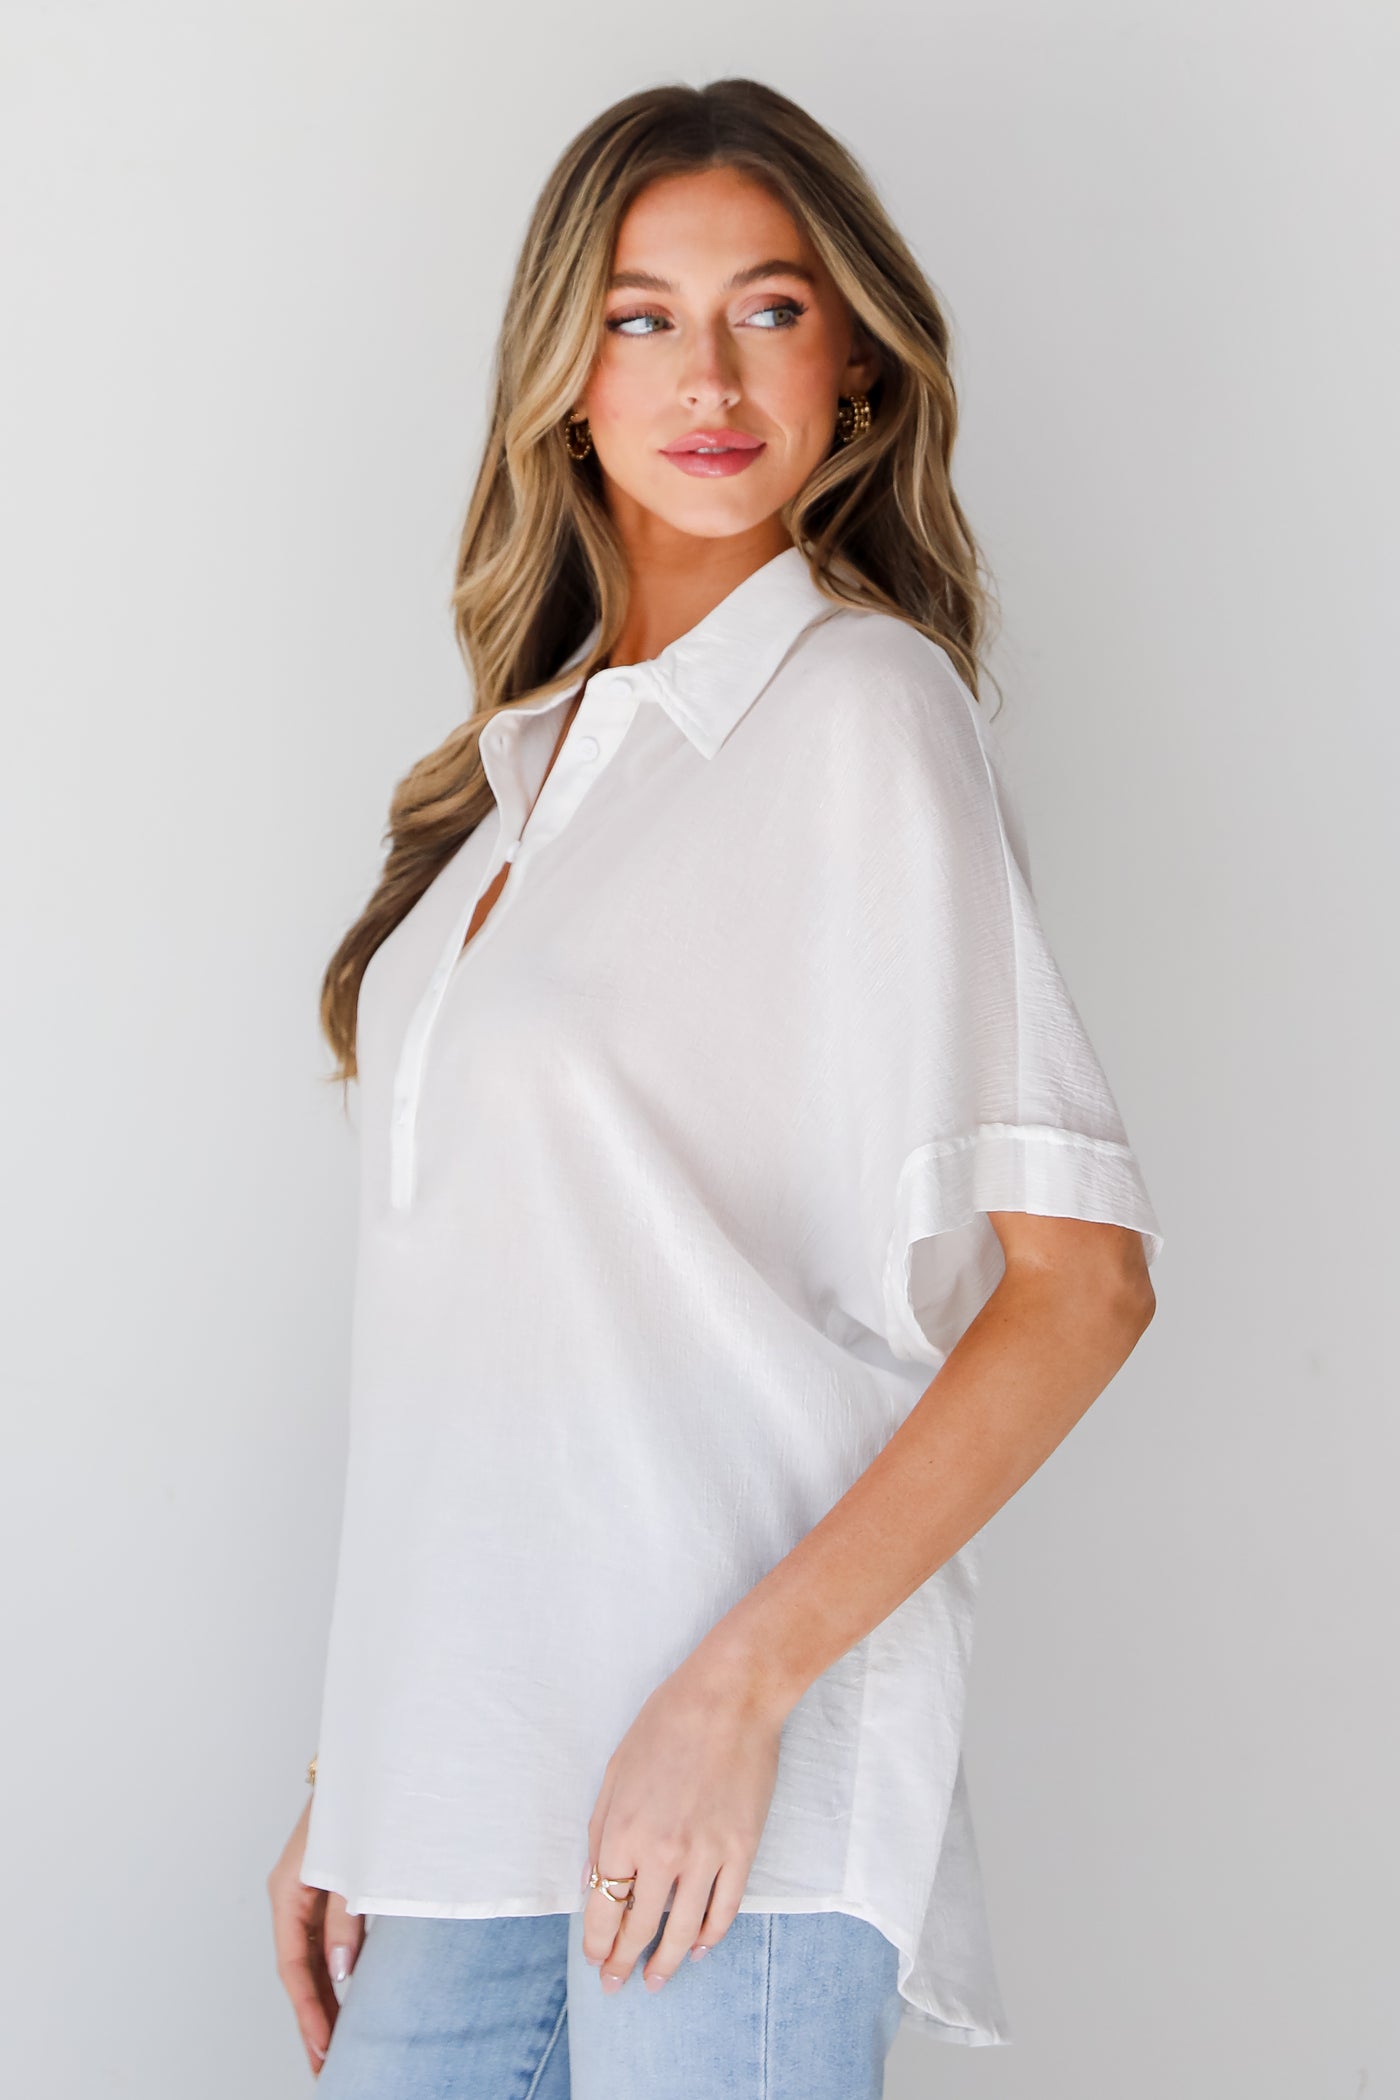 white collared Blouse side view